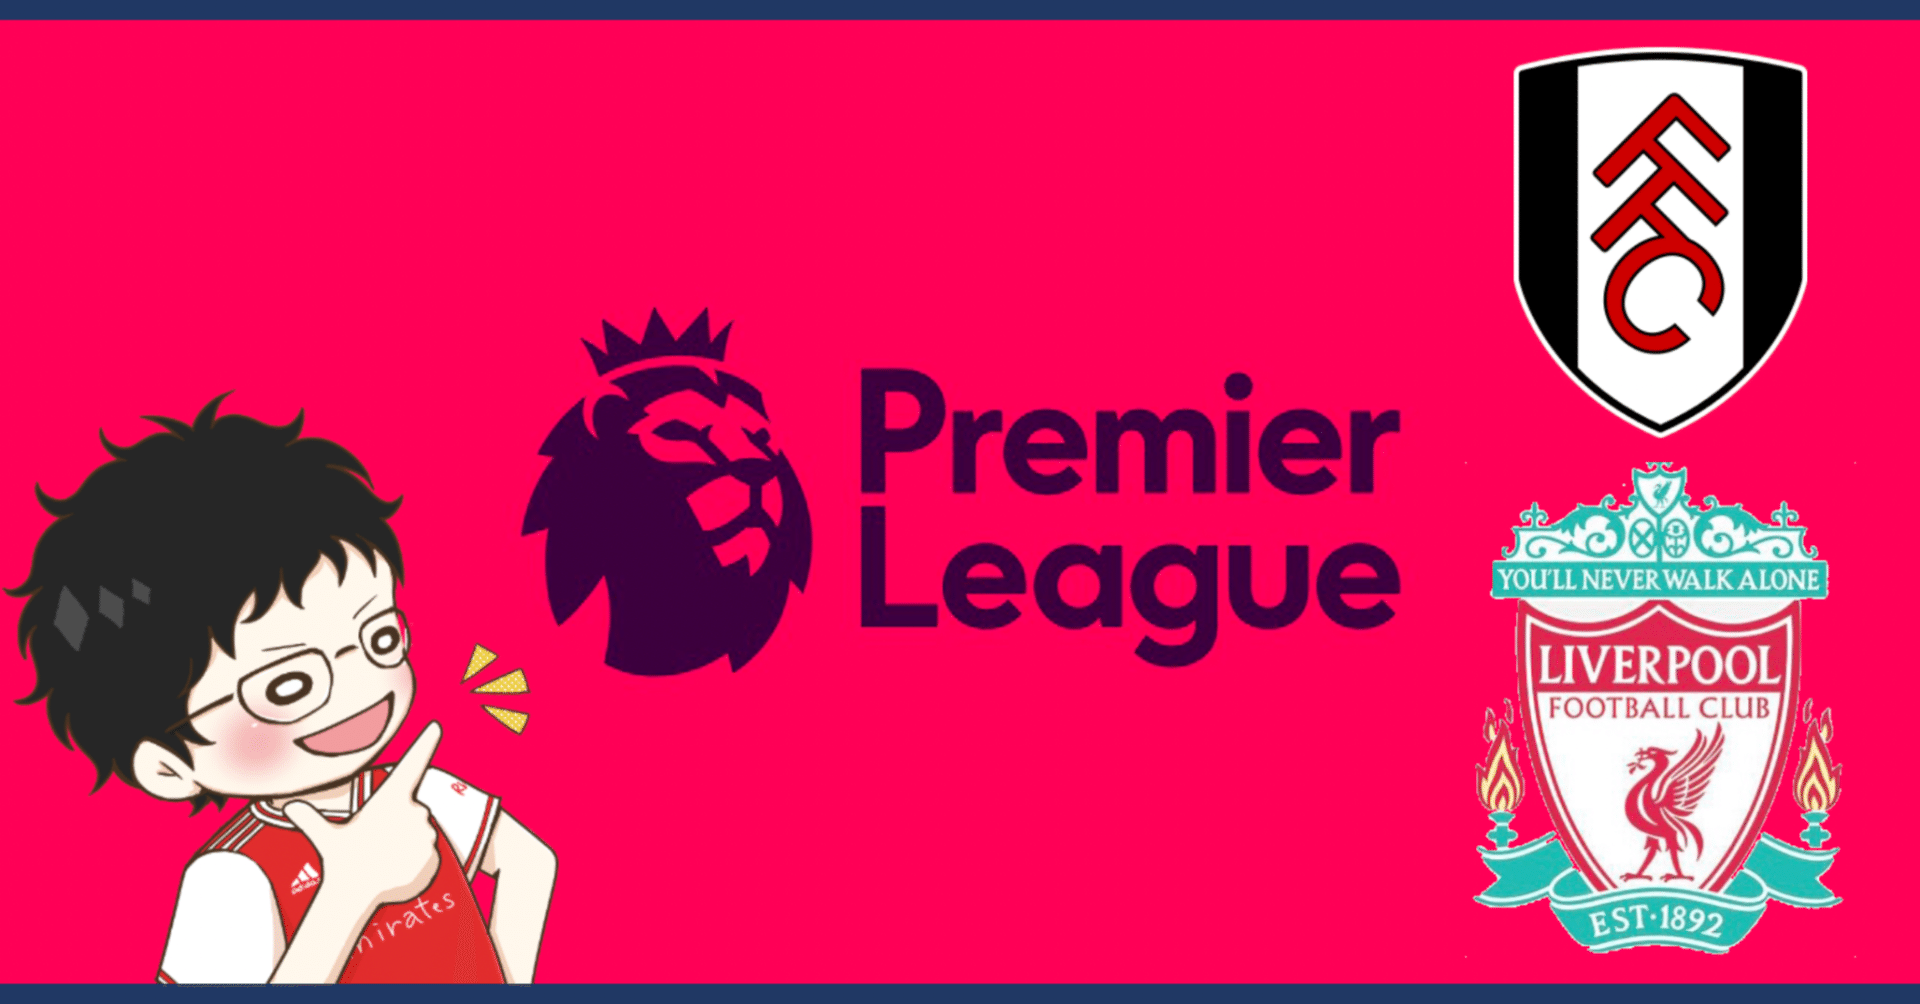 Catch Up Premier League 22 8 6 プレミアリーグ 第1節 フラム リバプール ハイライト せこ まとめ記事用 Note